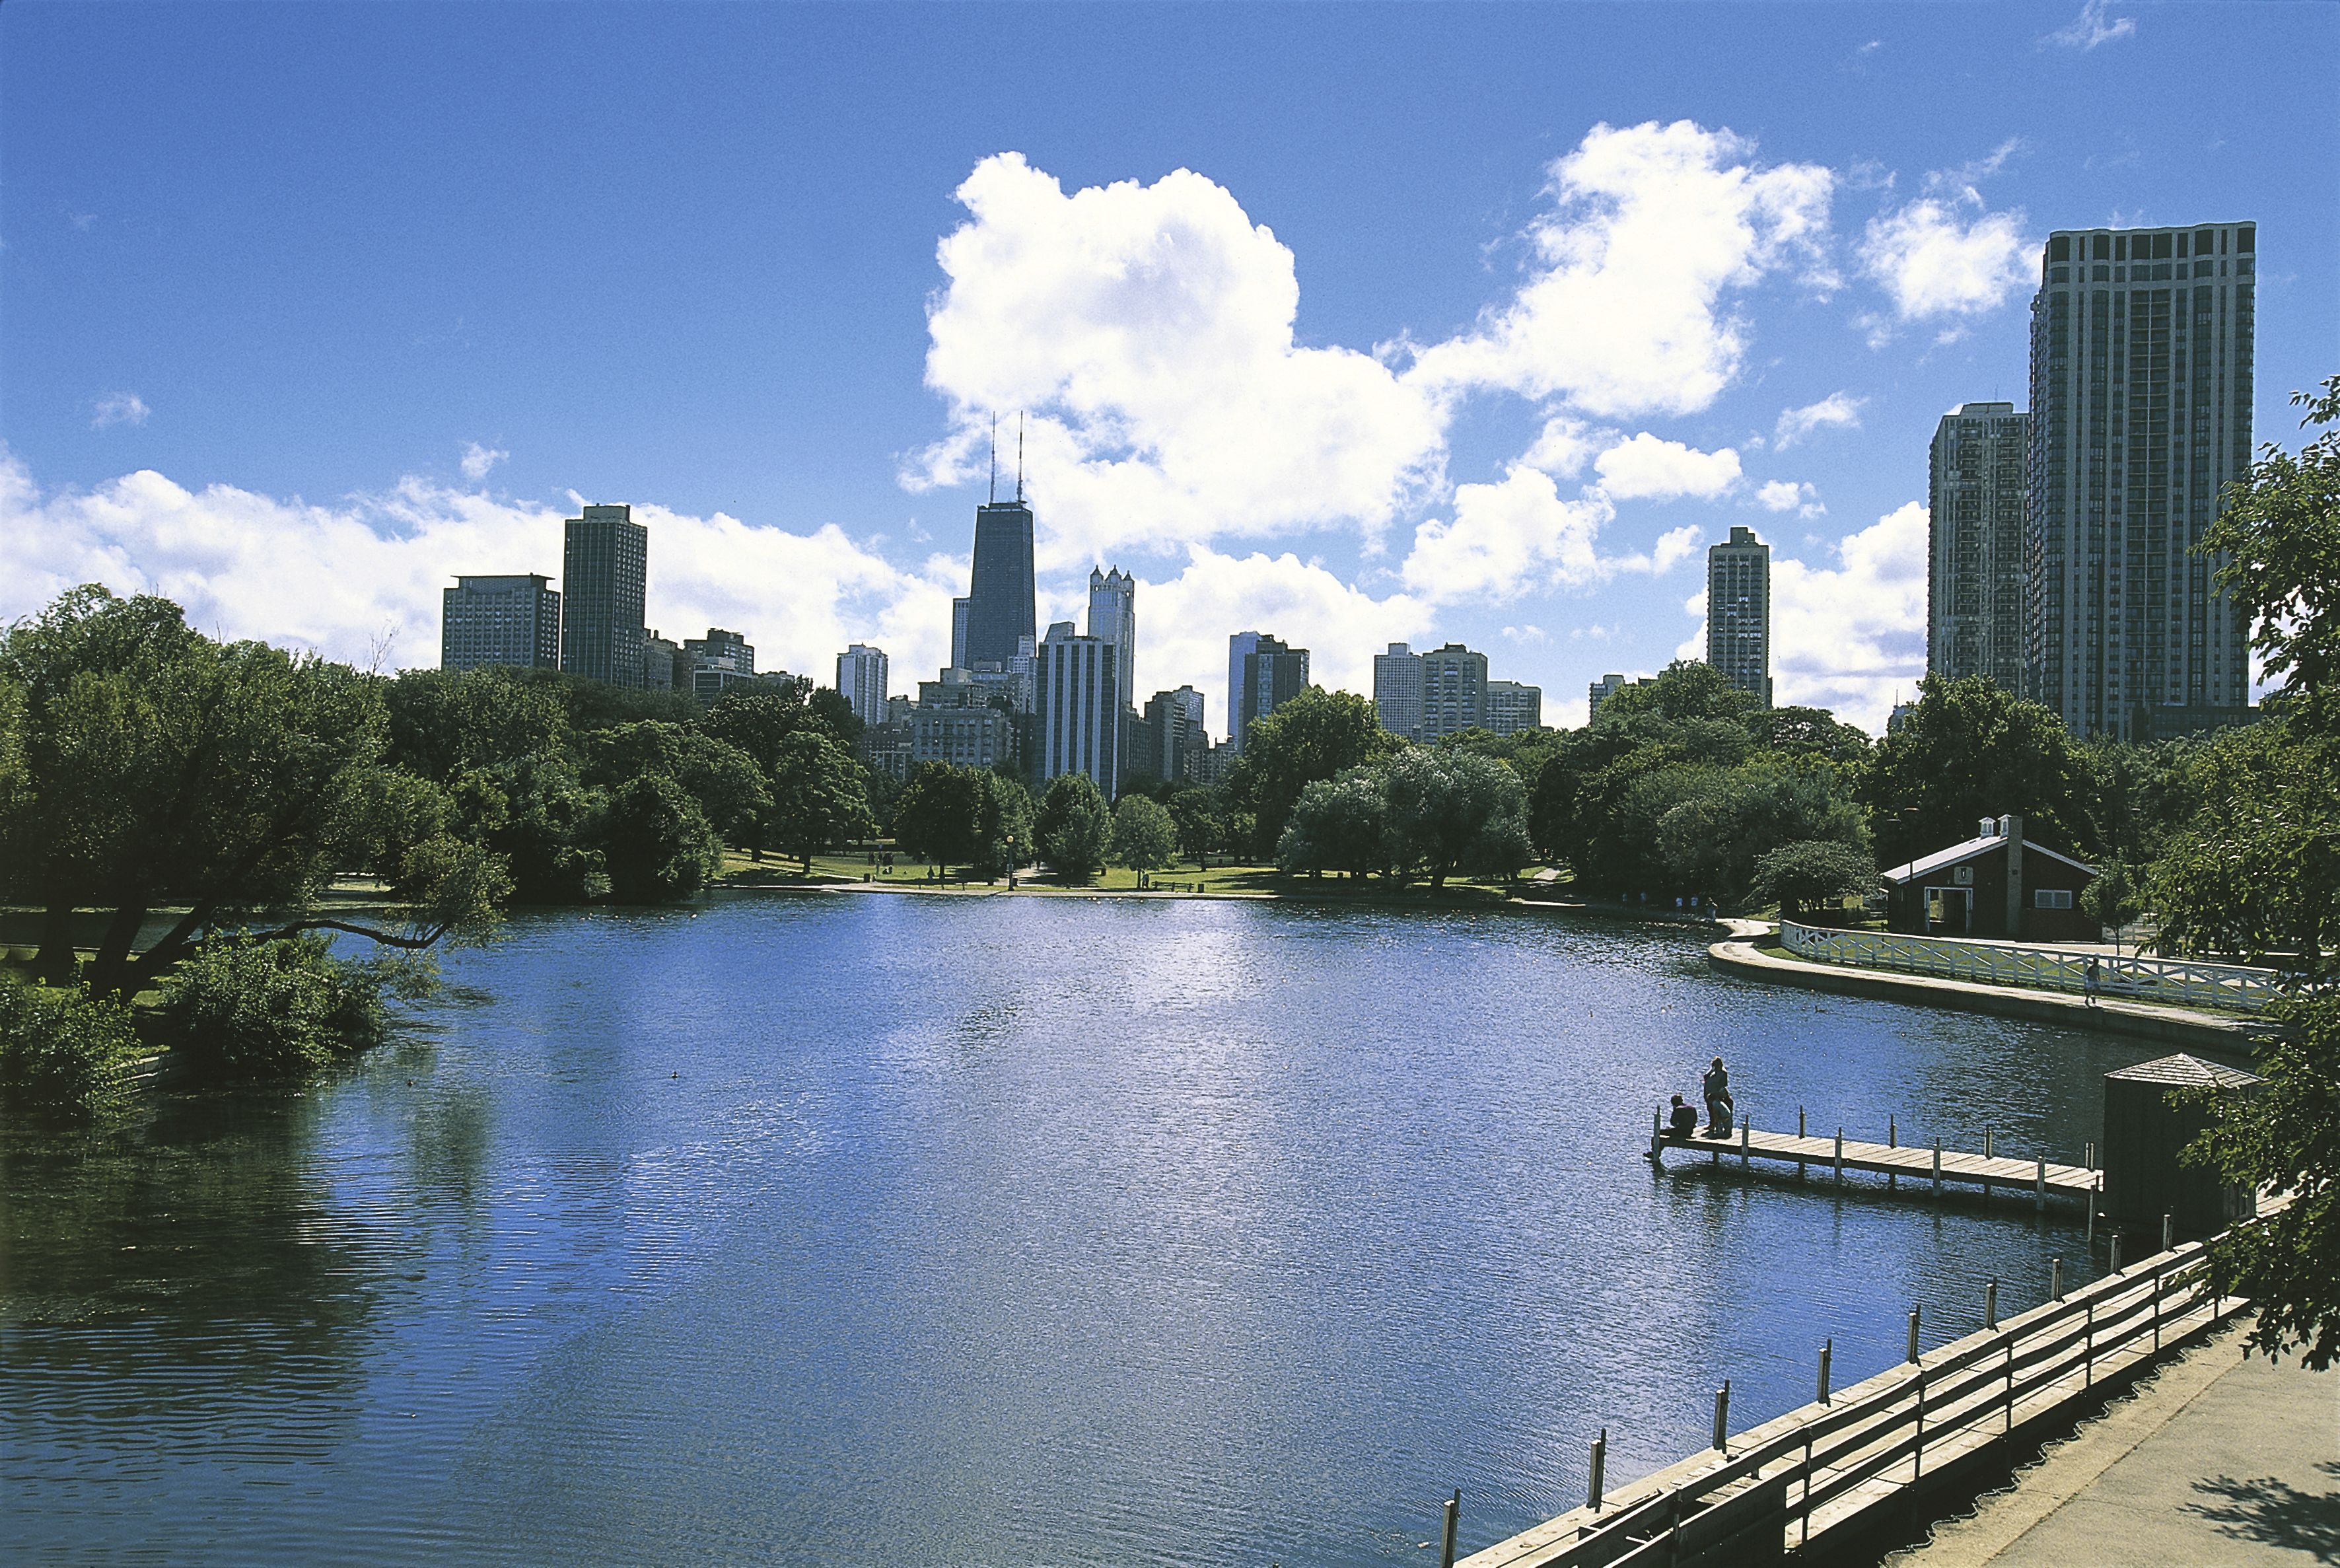 A pond in Lincoln Park with the Chicago skyline in the background.